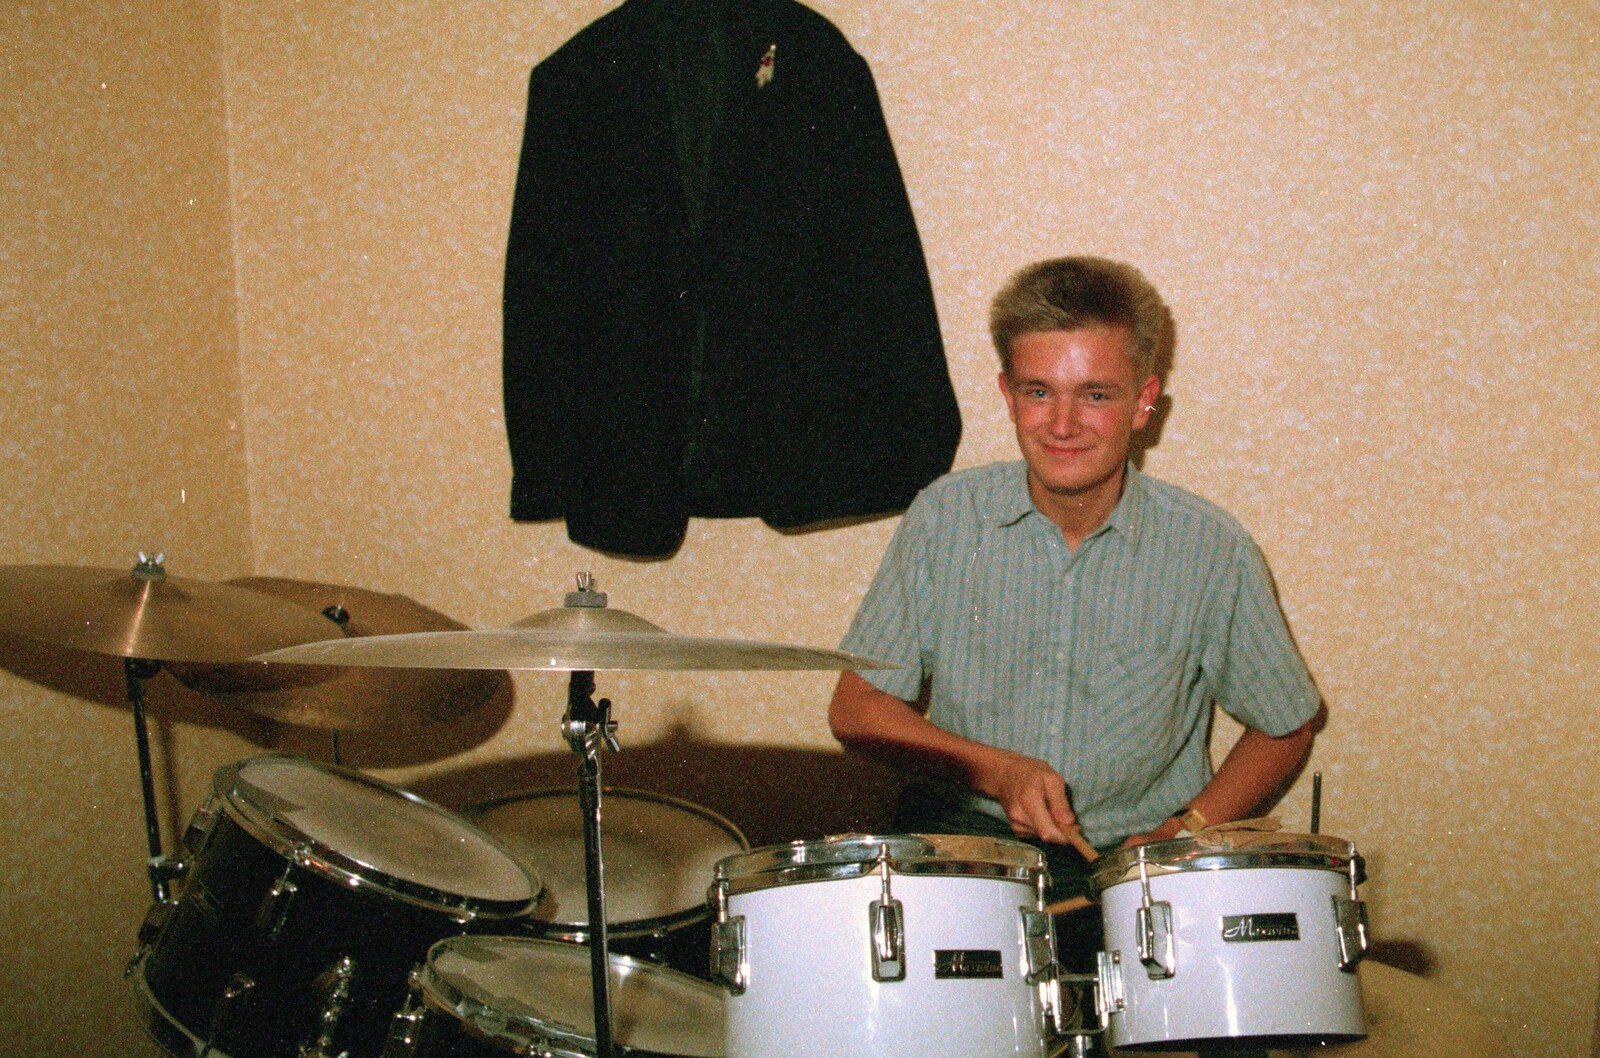 Nosher plays drums from Soman-Wherry and a Drumkit, Norwich and Red House, Norfolk - 22nd July 1988